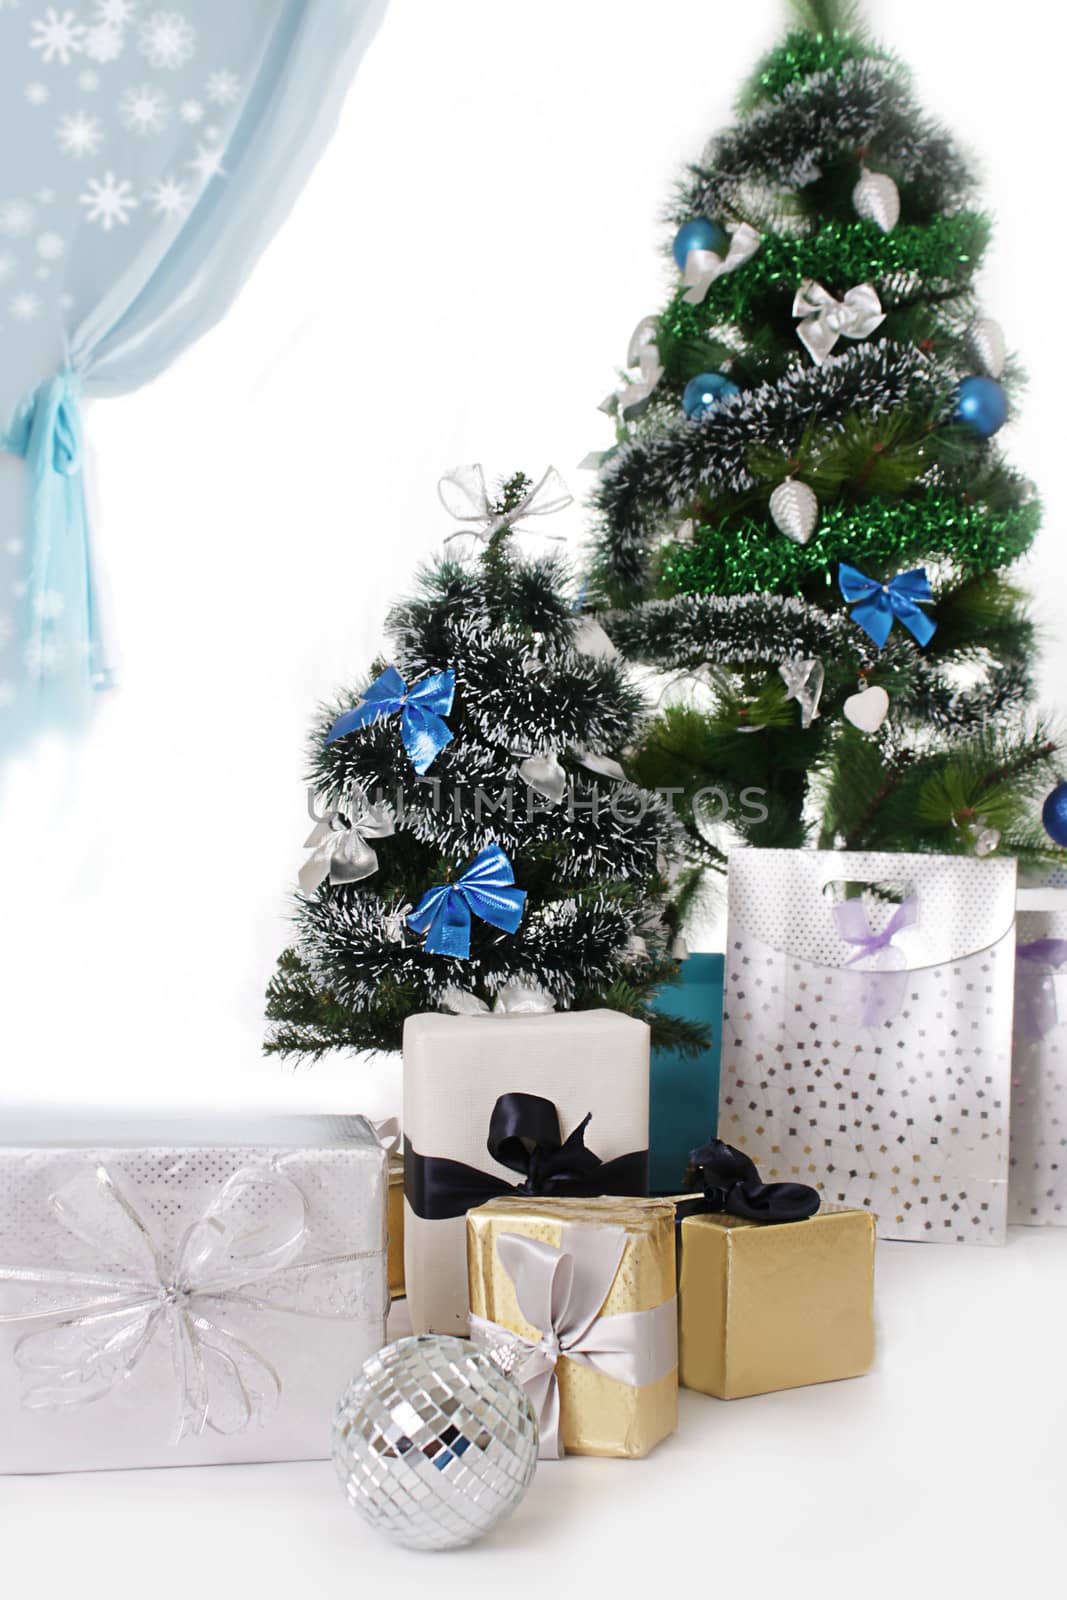 Christmas tree decorated with blue ornaments and presents by Angel_a